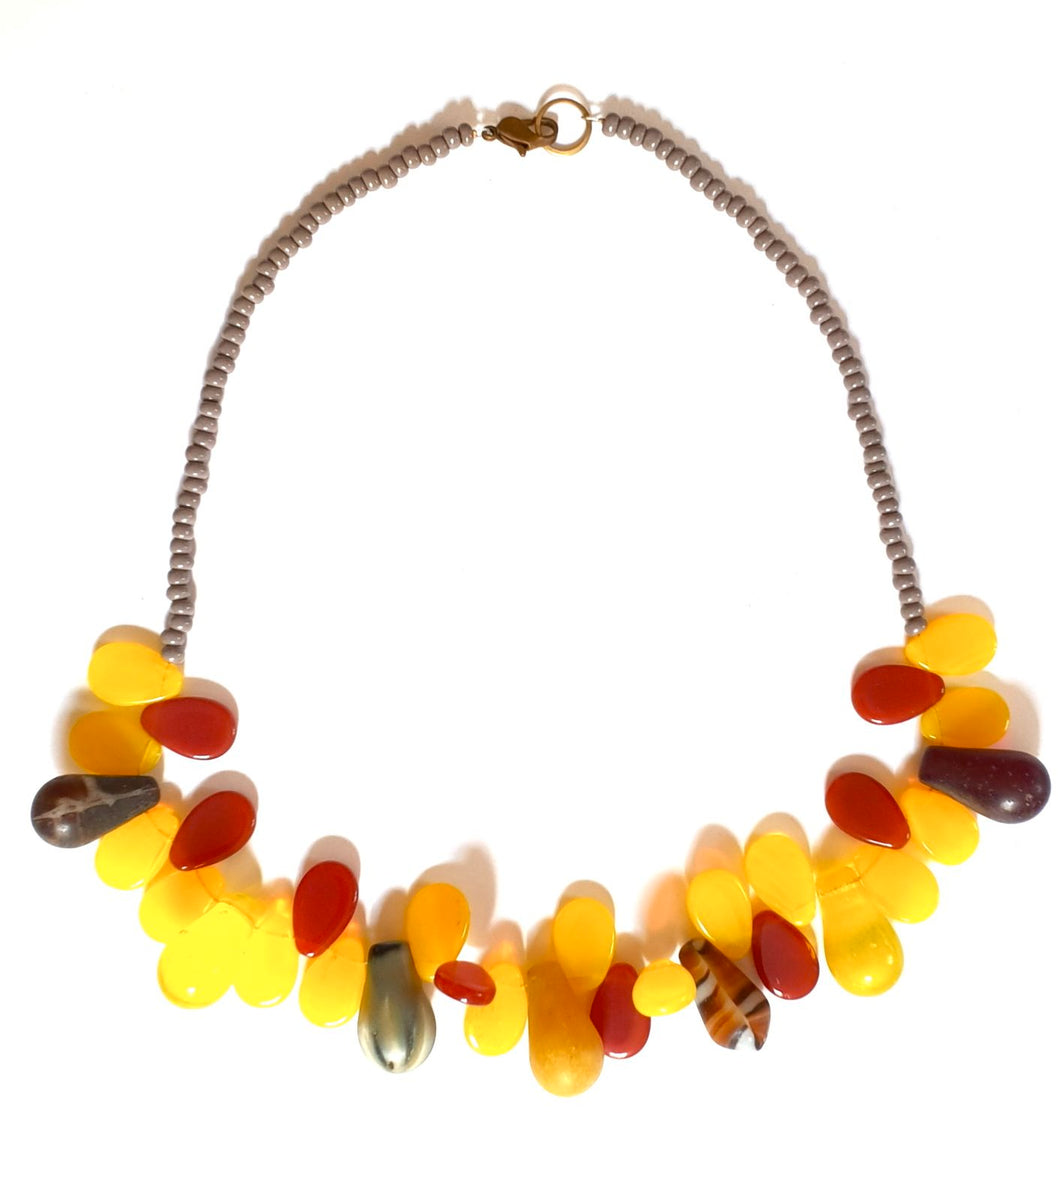 African Trade Bead Necklace Yellow Carnelian